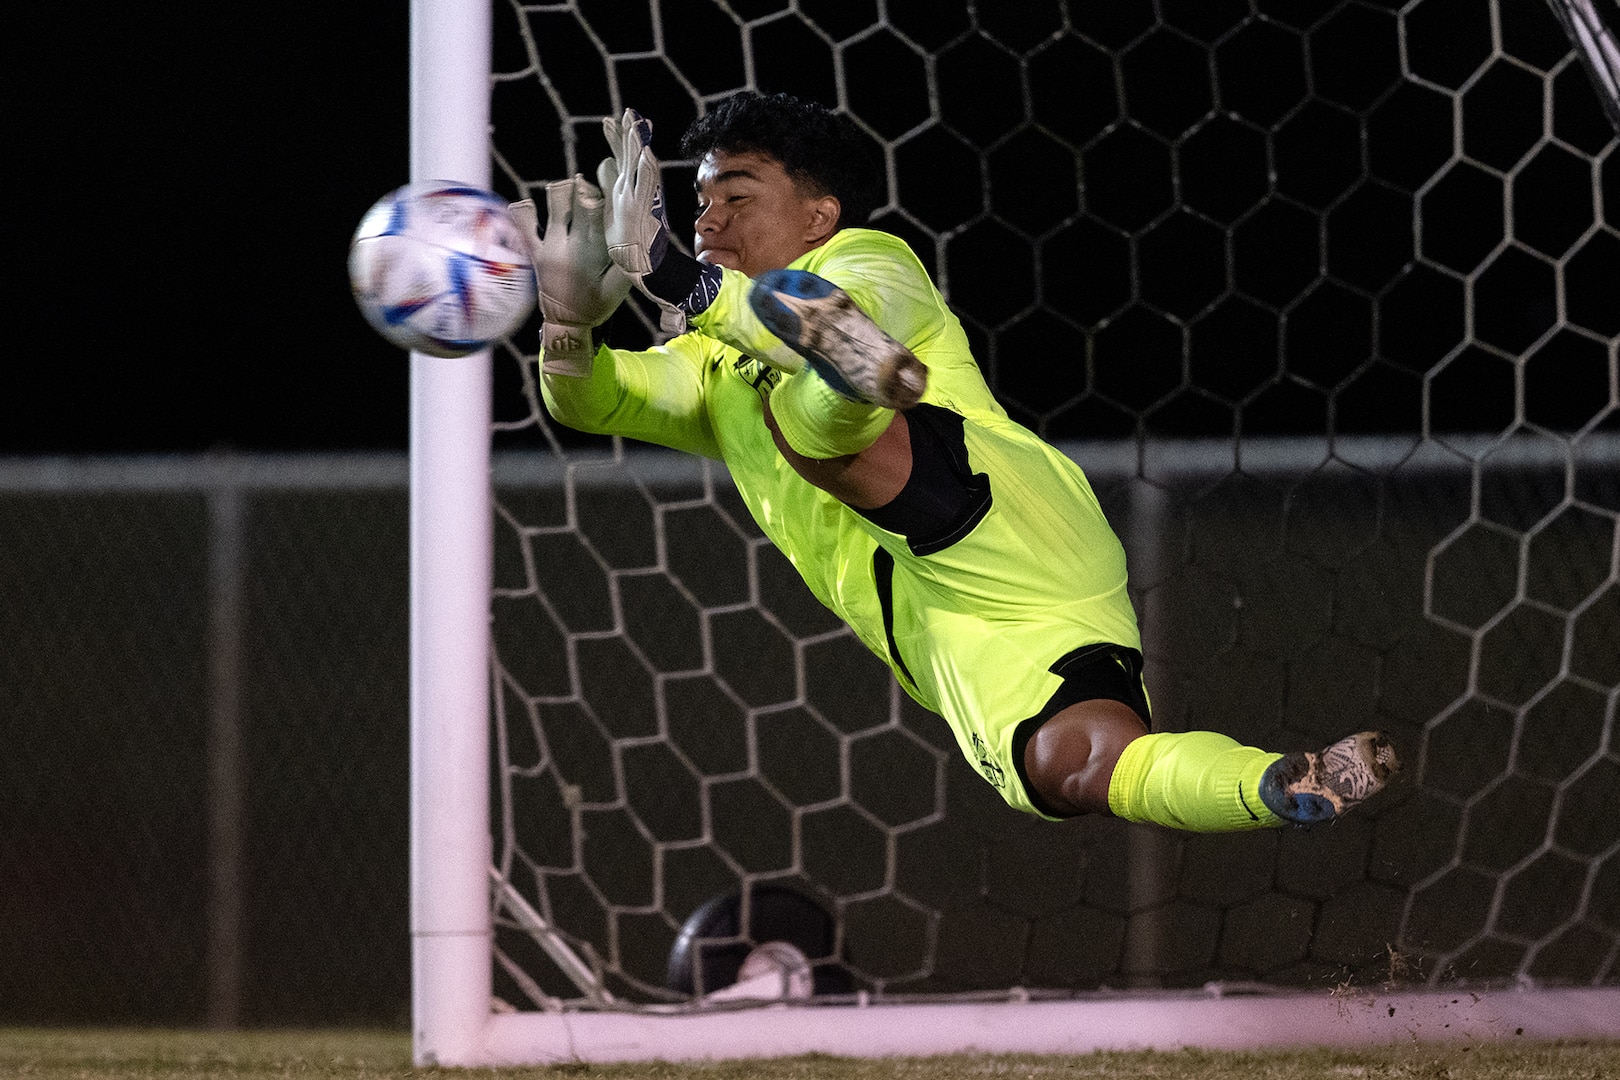 Senior Airman Brian Leyva.Occampa of Nellis AFB, Nevada stops a crucial penalty kick to win the match against Navy during the 2024 Armed Forces Men's Soccer Championship hosted by Marine Corps Logistics Base Albany, Georgia at Albany State University from April 2-10. The Armed Forces Championship features teams from the Army, Marine Corps, Navy (with Coast Guard players), and Air Force (with Space Force players). (DoD photo by EJ Hersom)